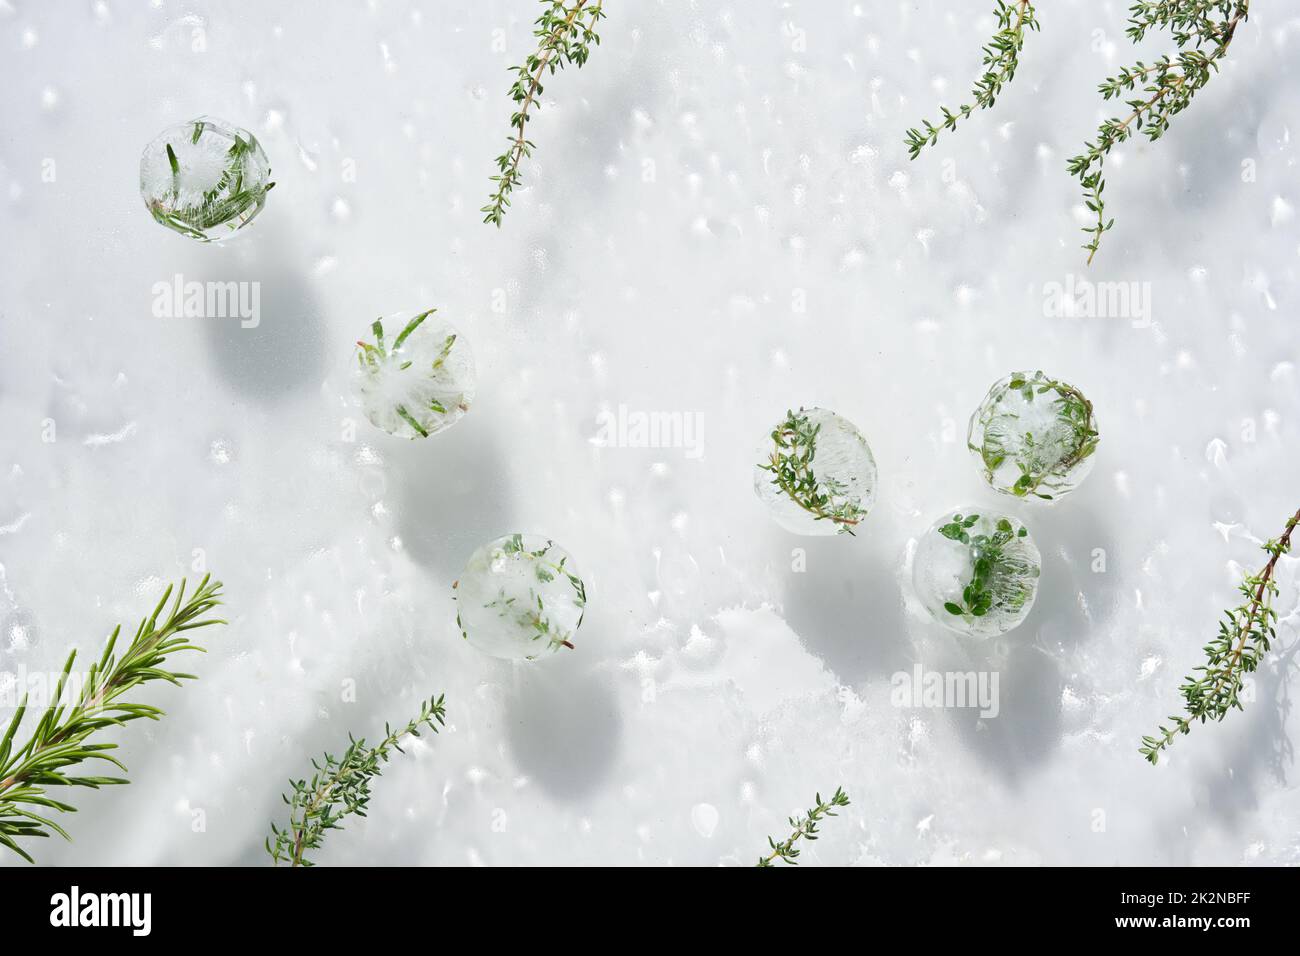 Wet off white water background with melting balls of ice with frozen herbs. Rosemary, oregano and thyme plants. Frozen plants inside pieces of ice. Di Stock Photo